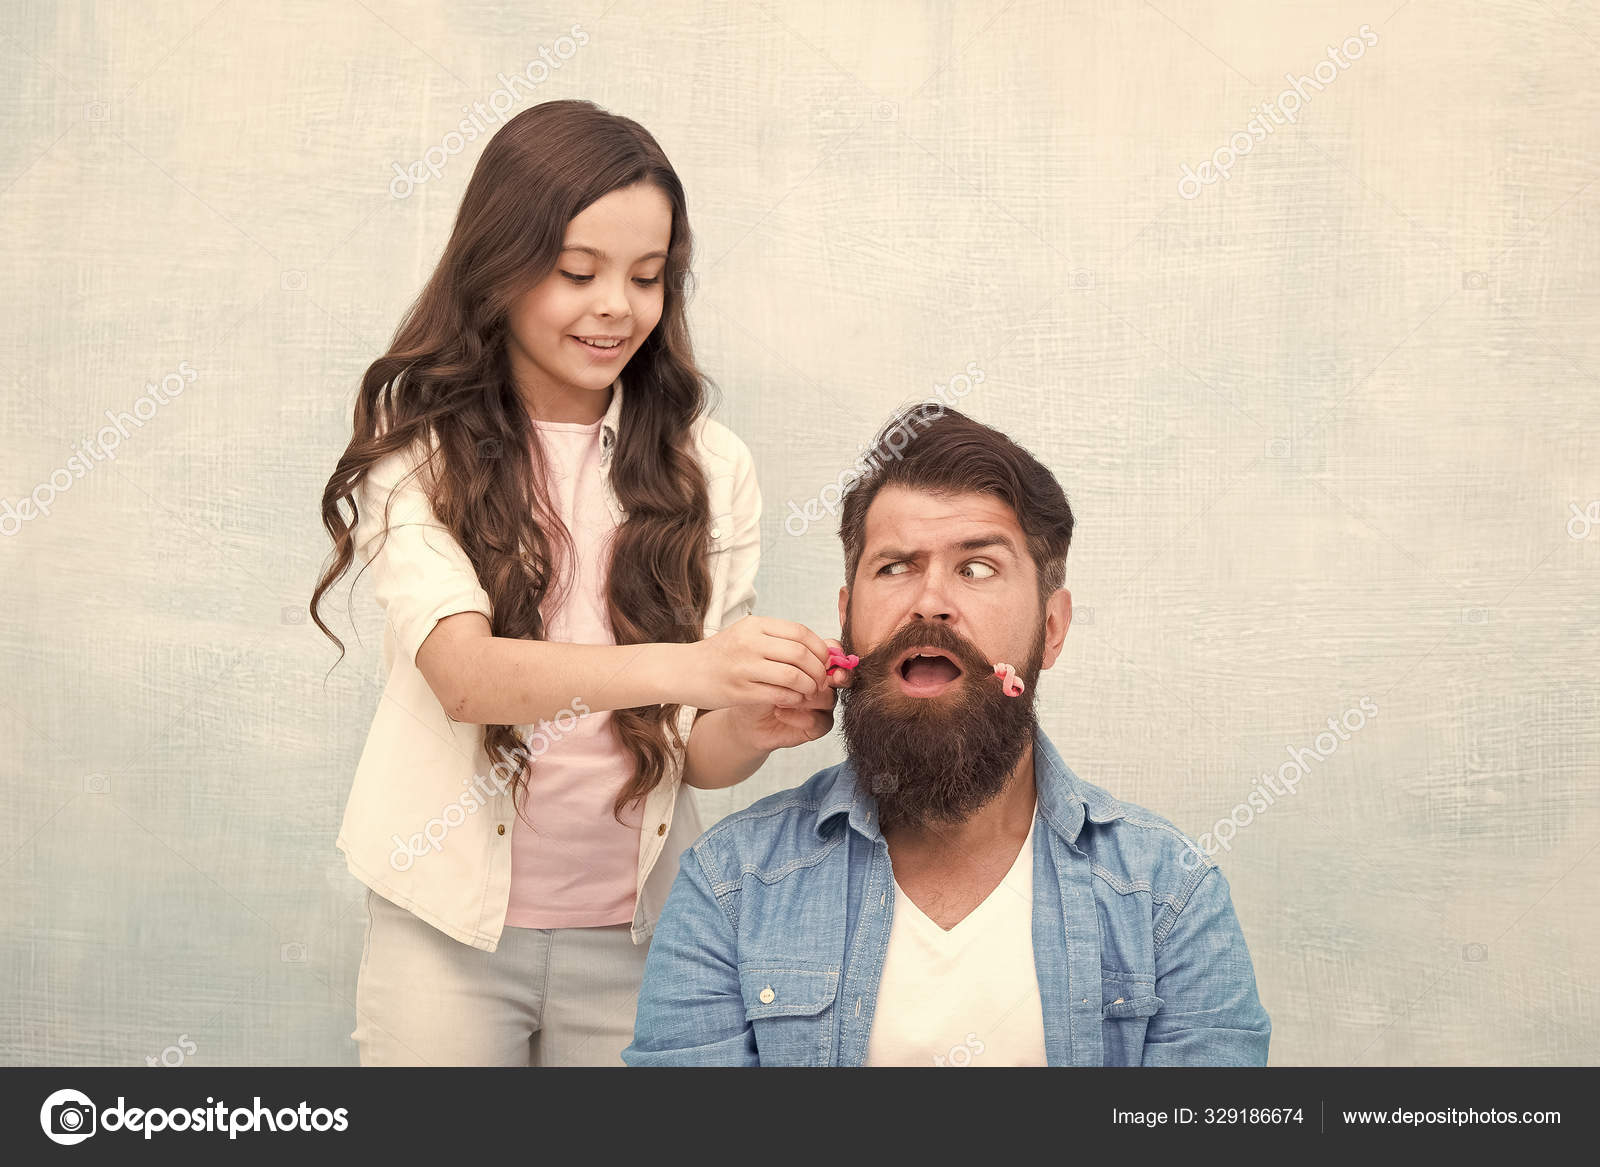 With healthy dose of openness any dad can excel at raising girl. Child  making hairstyle styling father beard. Being parent means present for kid  interests. Change hairstyle. Create funny hairstyle Stock Photo